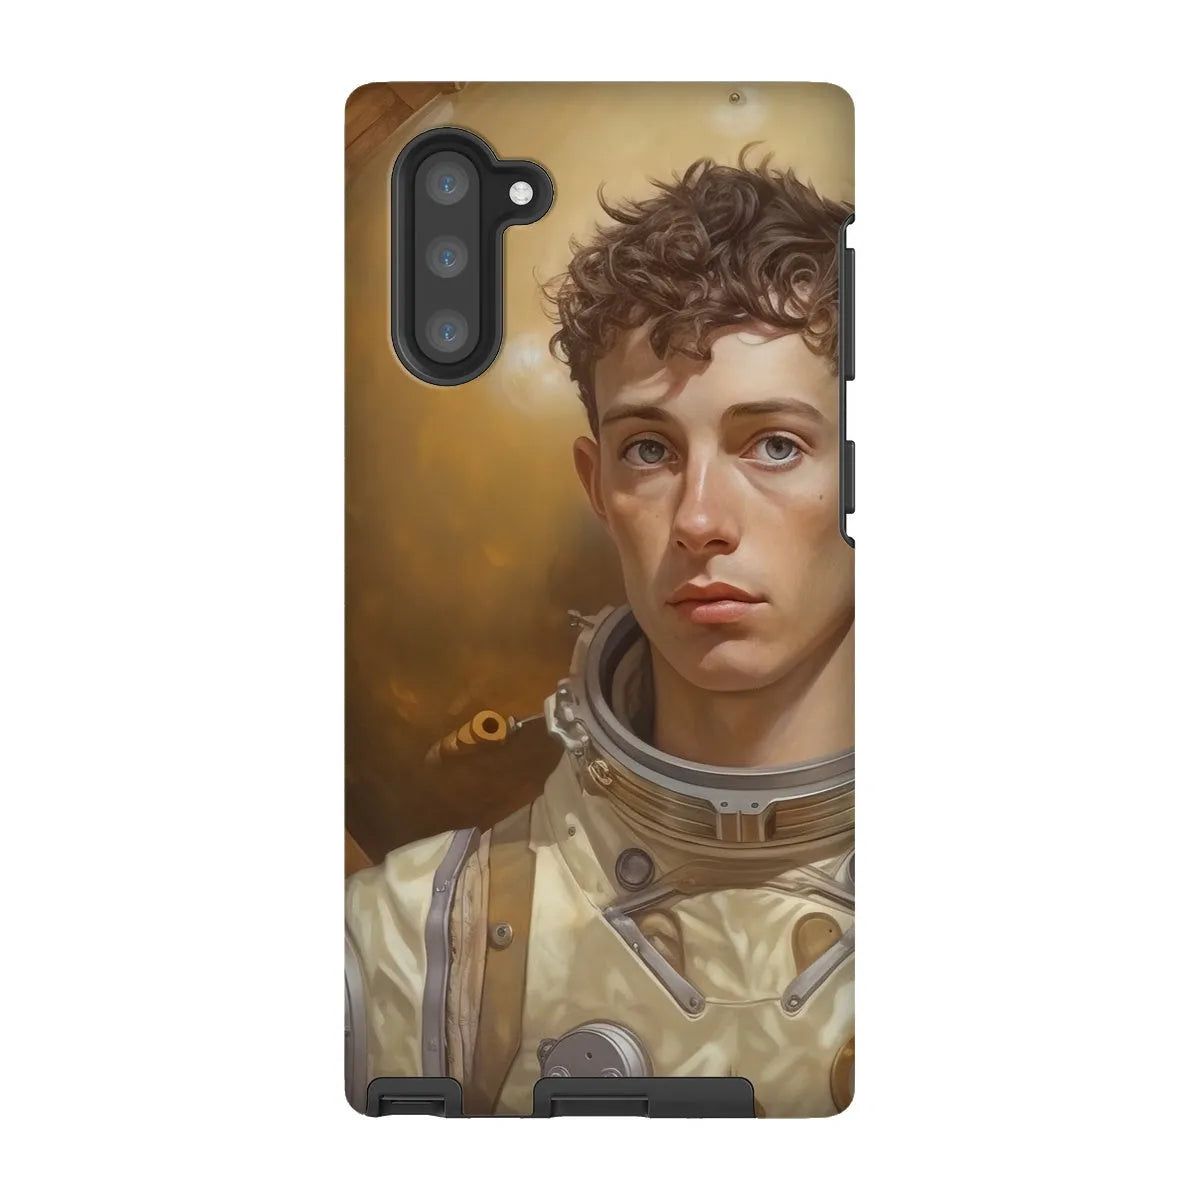 Noah The Gay Astronaut - Lgbtq Art Phone Case - Samsung Galaxy Note 10 / Matte - Mobile Phone Cases - Aesthetic Art